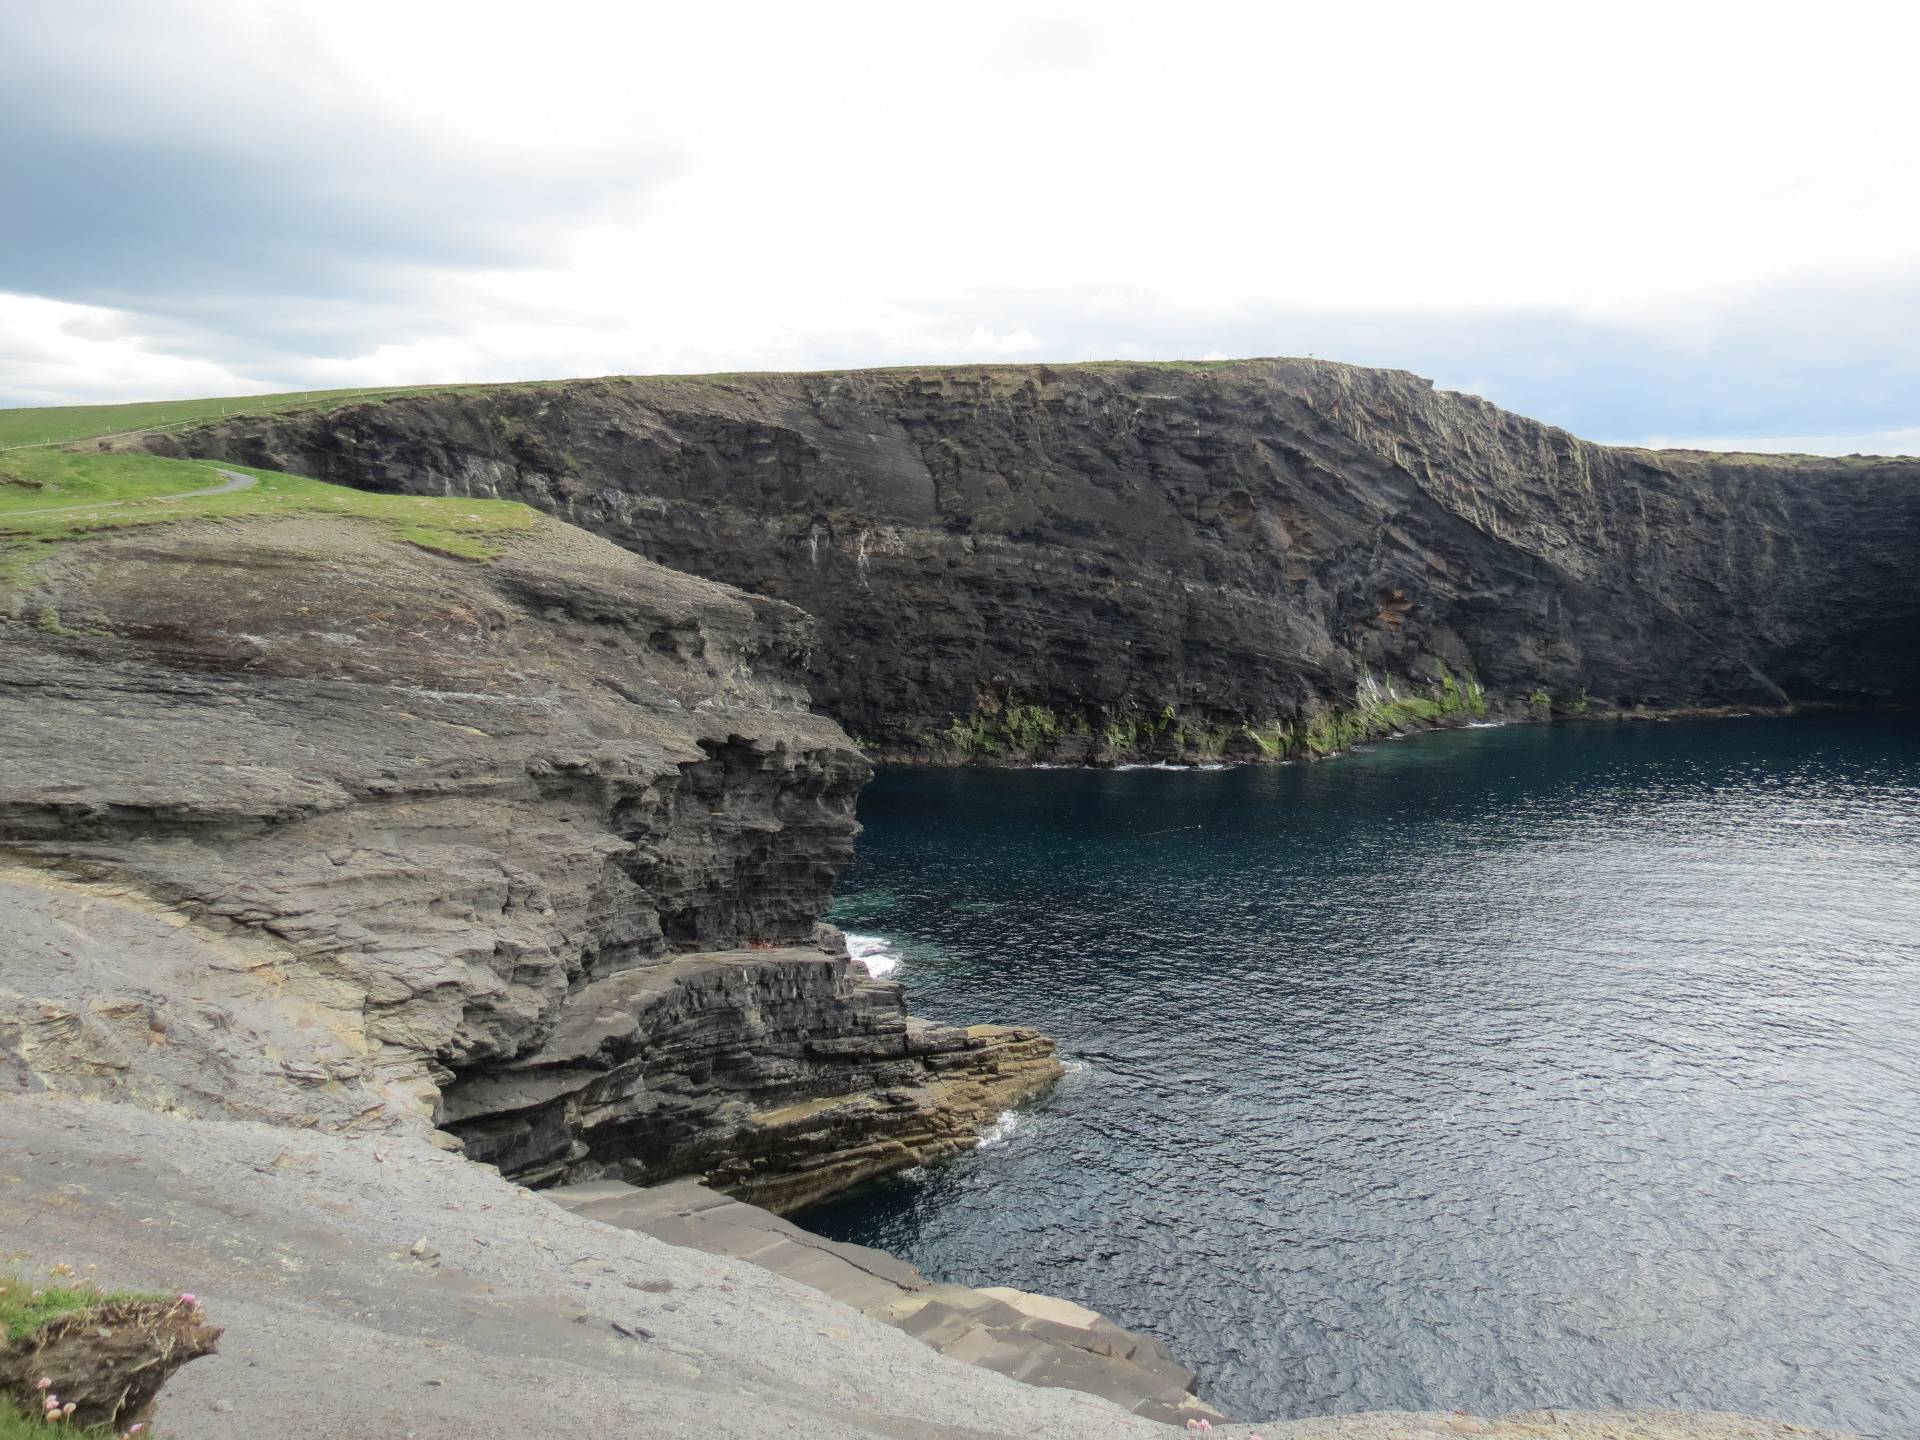 Wild Atlantic Way. Cliffs at Kilkee in Ireland, limpets, barnacles and other oceanic curiosities.